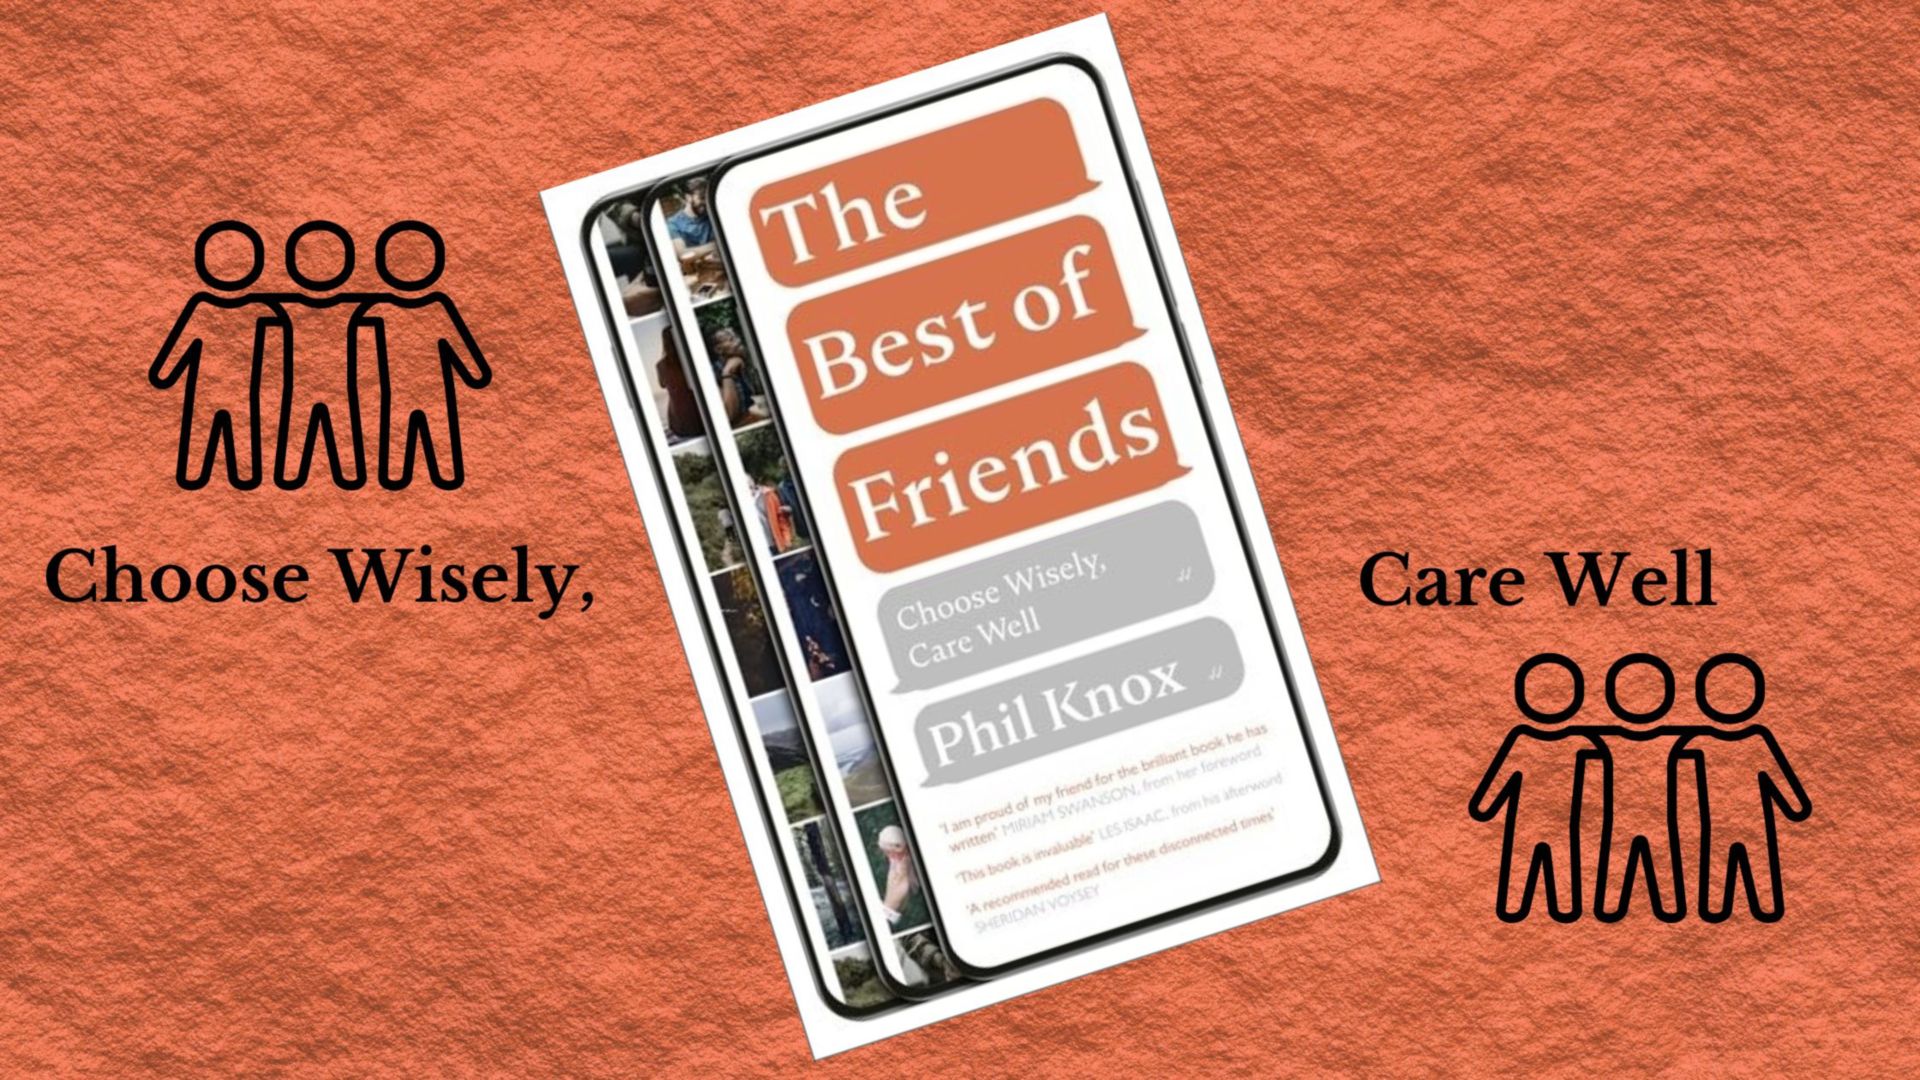 Review of Phil Knox's new book 'The Best of Friends'